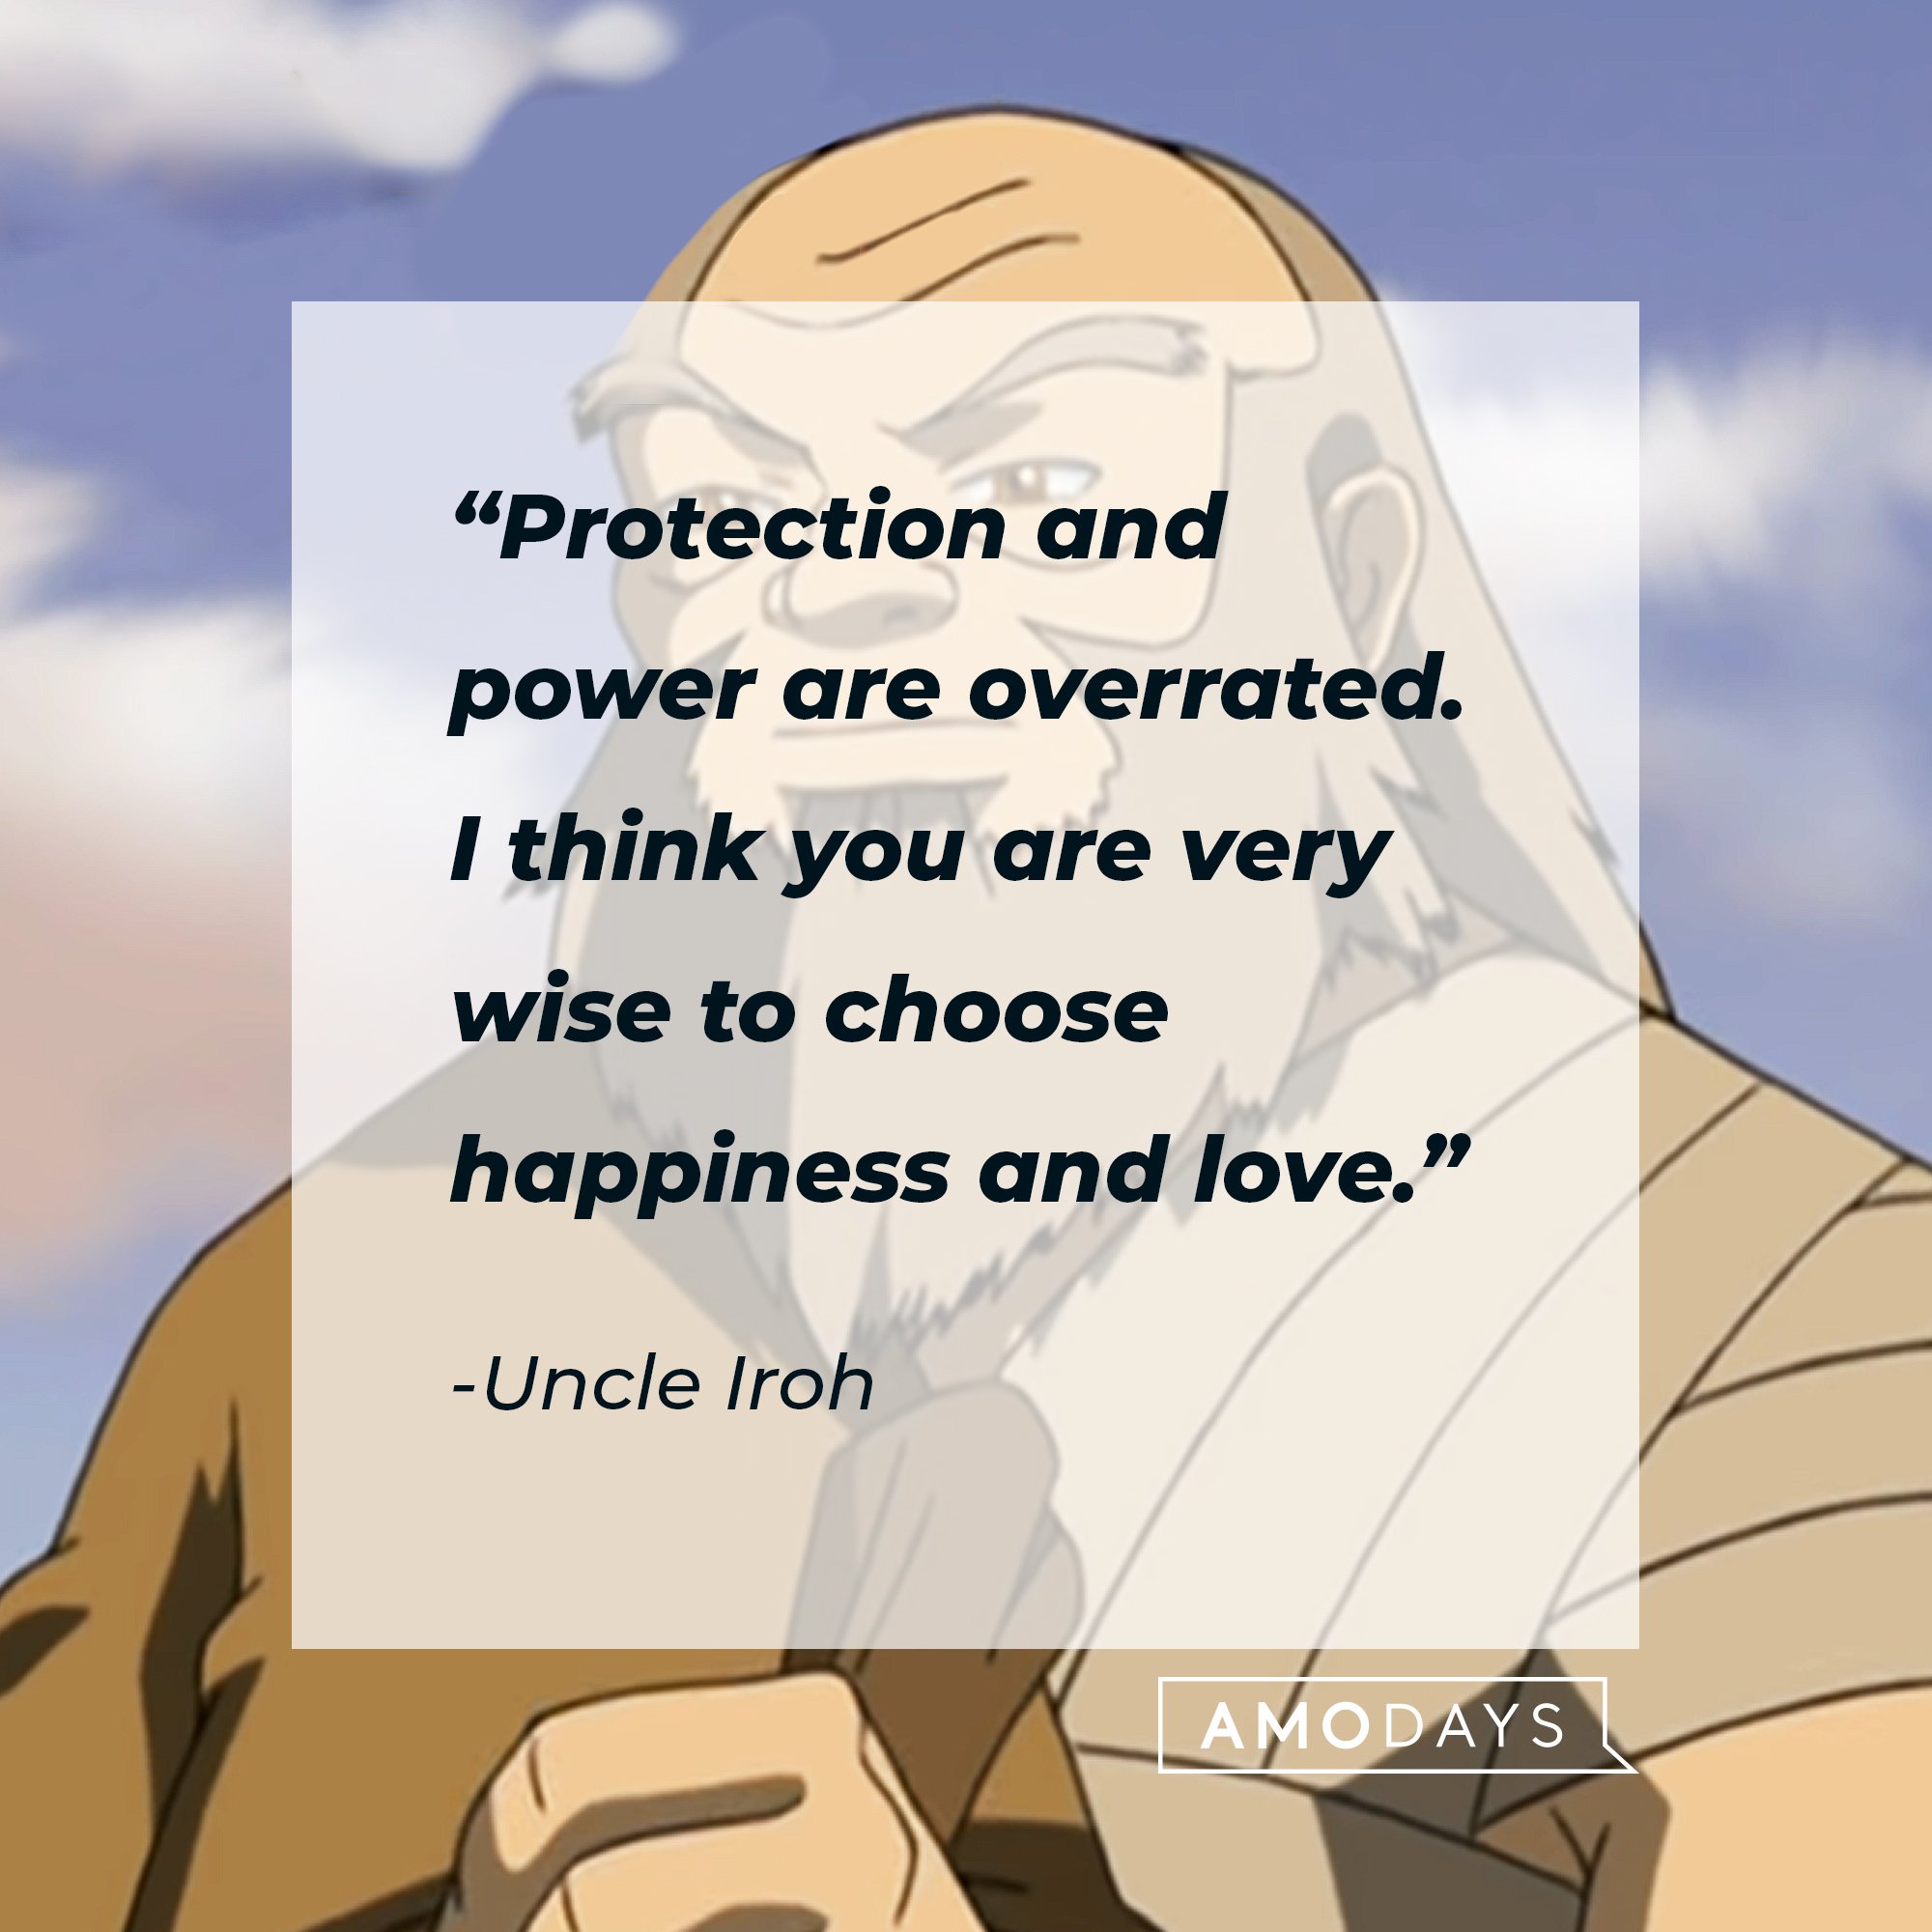 Uncle Iroh's quote: “Protection and power are overrated. I think you are very wise to choose happiness and love.” Image: AmoDays